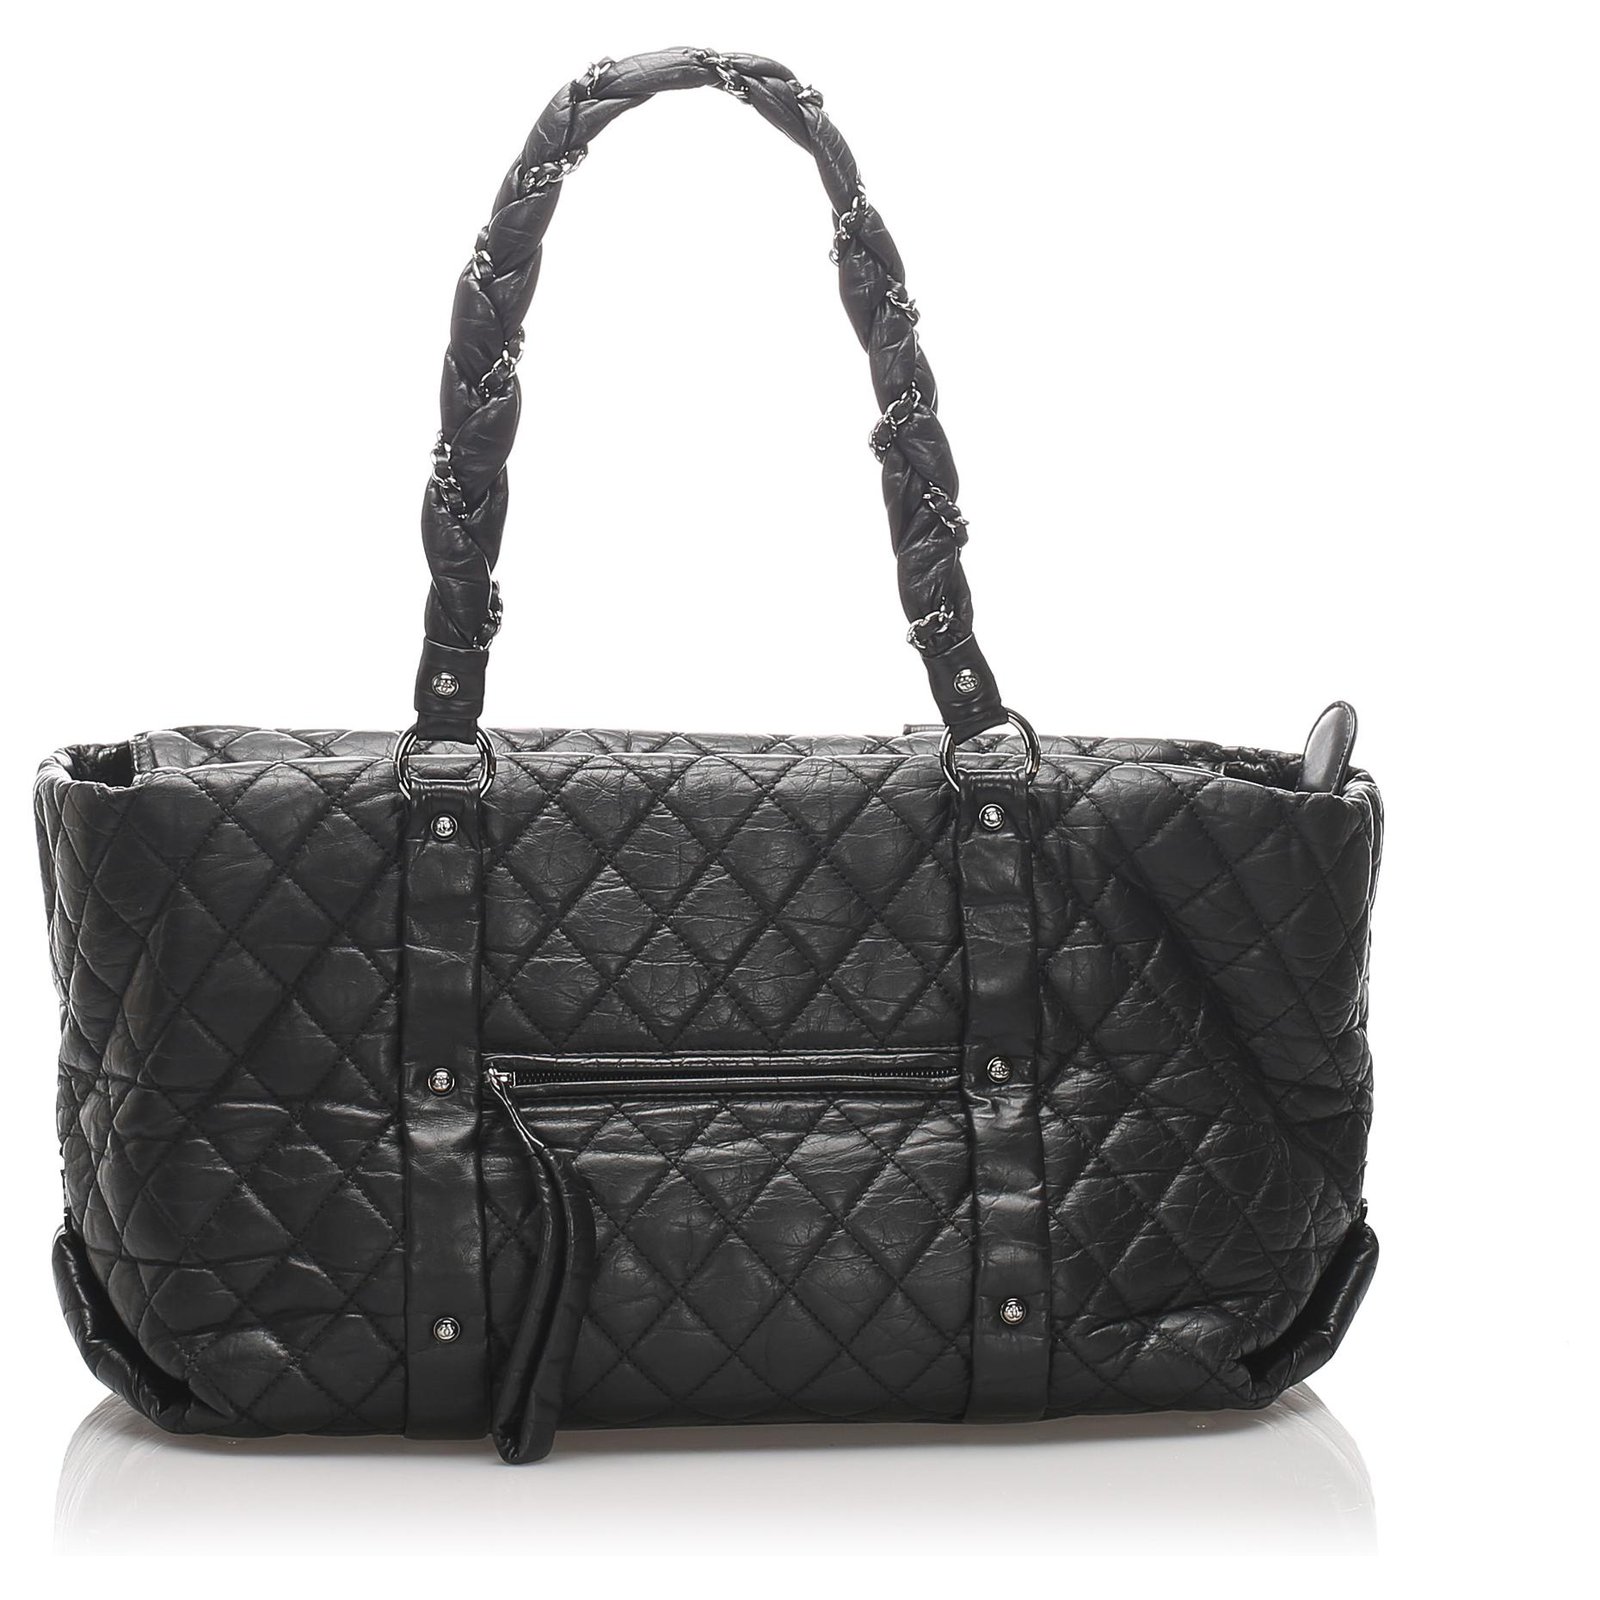 Chanel Large Lady Braid Tote